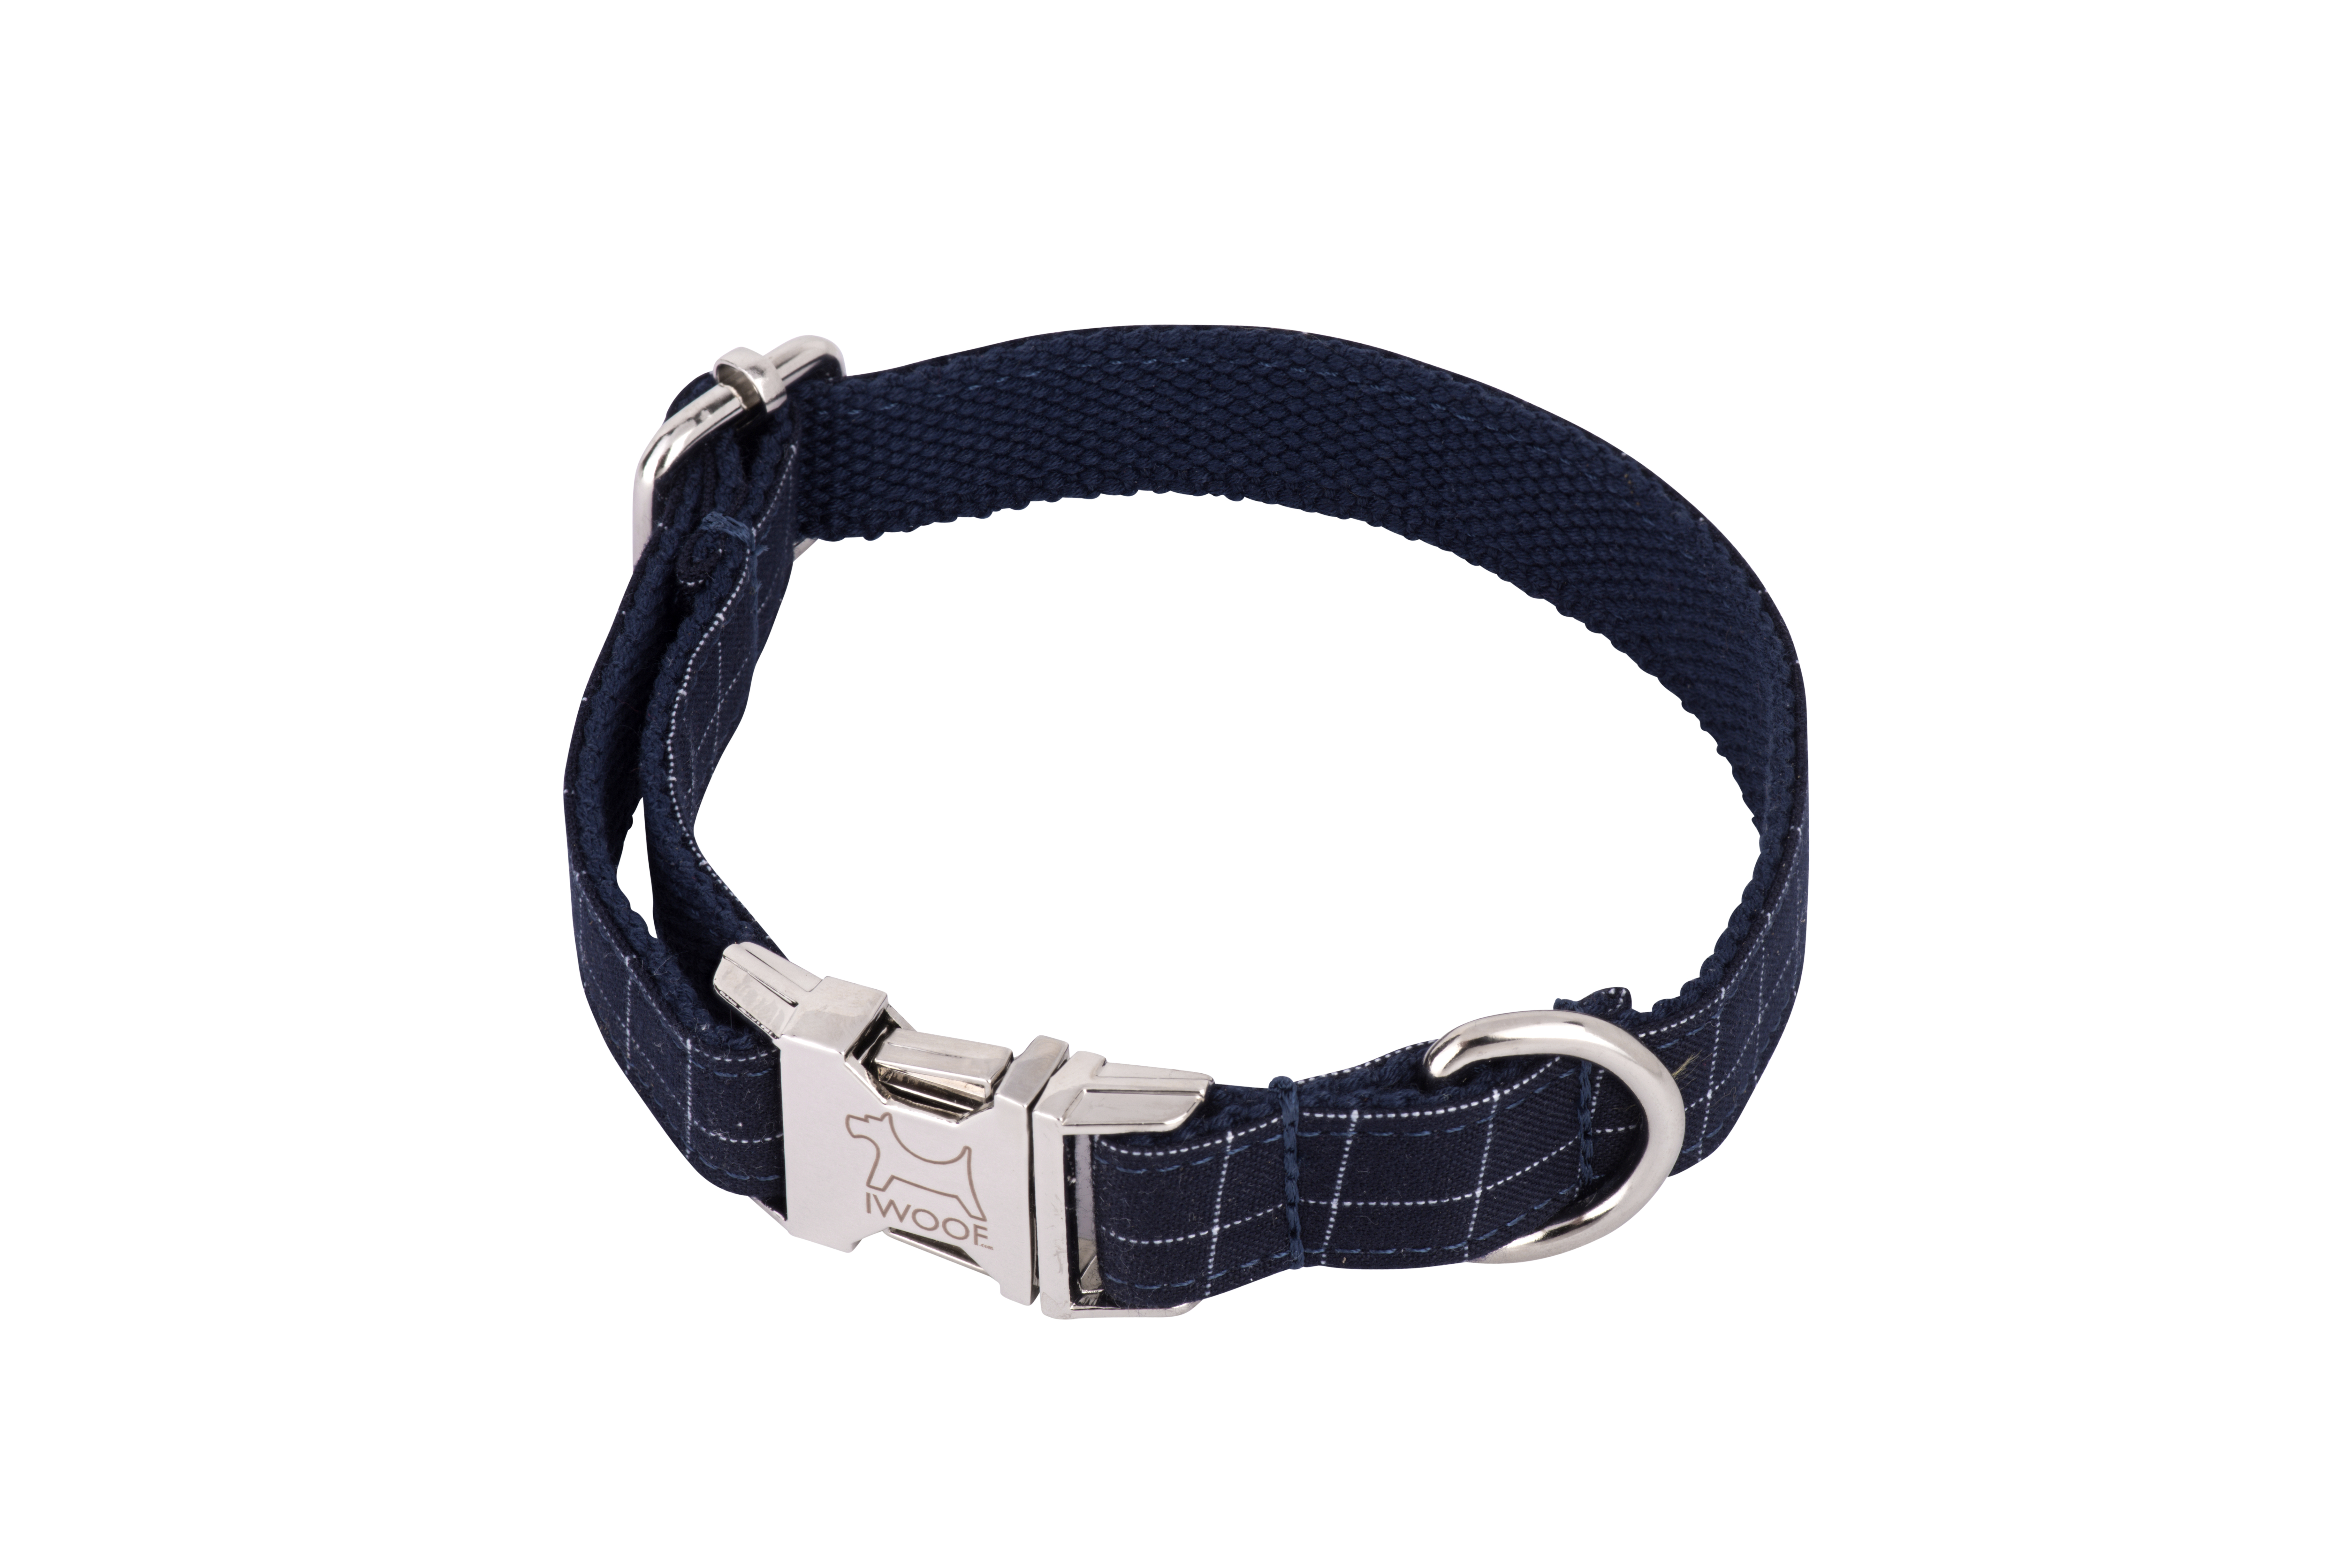 Cornish Navy Check designer dog collar and dog lead by IWOOF